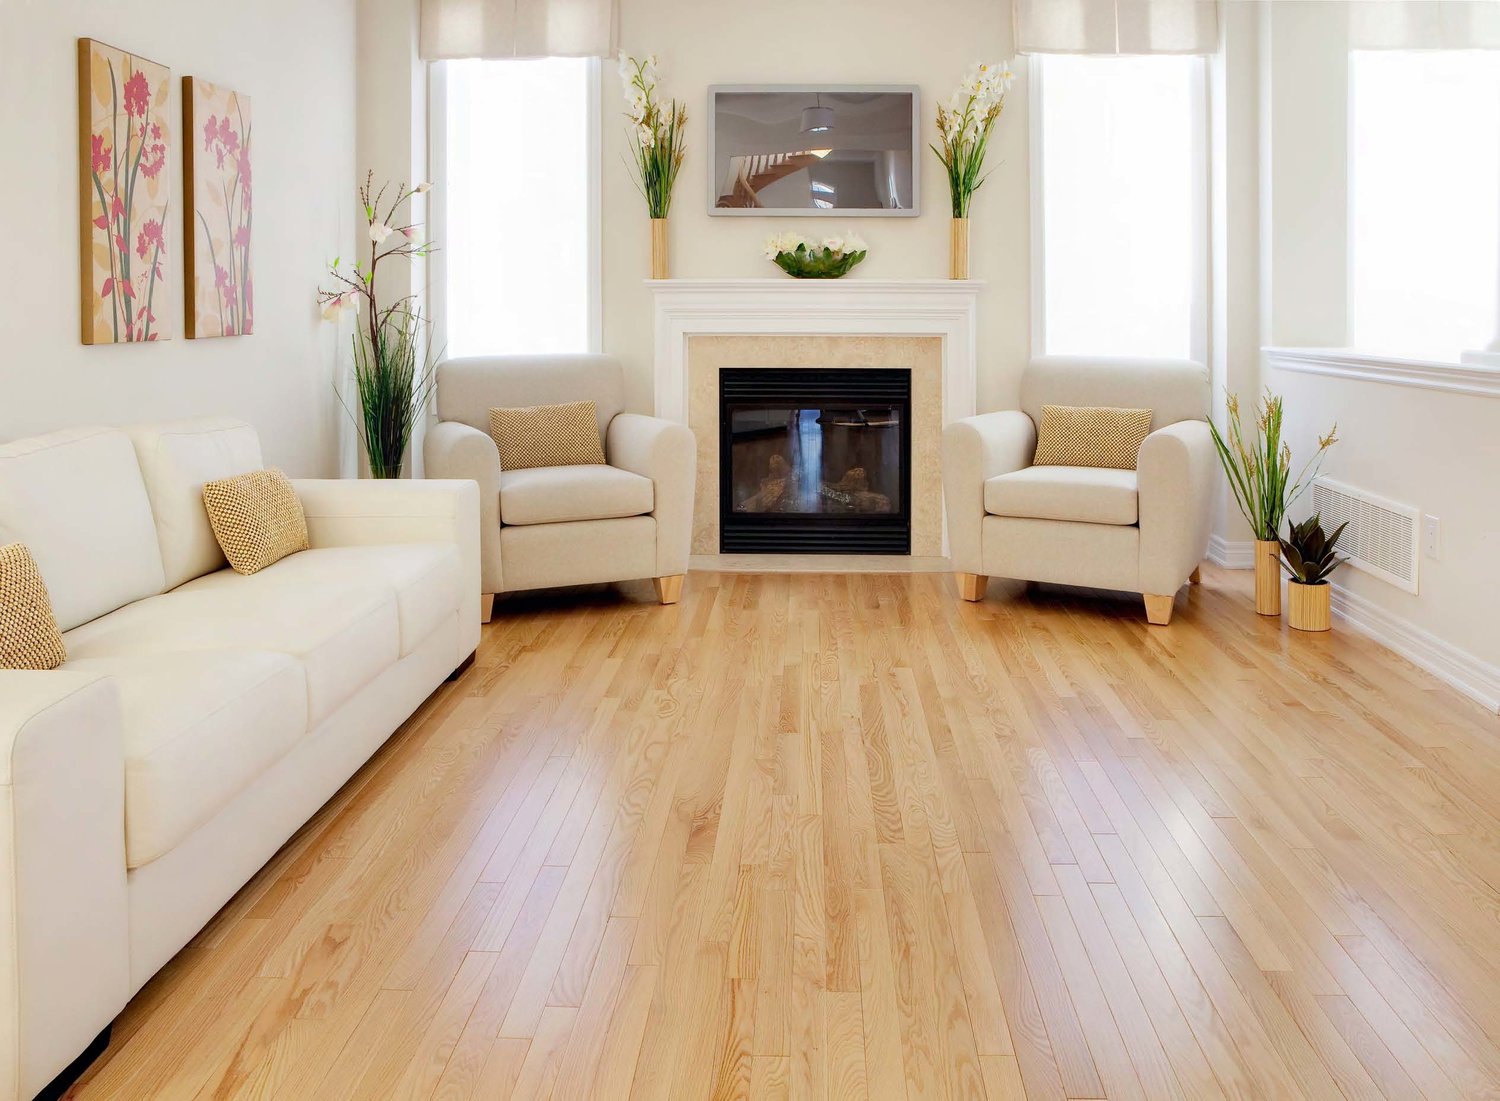 Reveal 58+ Exquisite Living Room Colors With Red Oak Floors For Every Budget